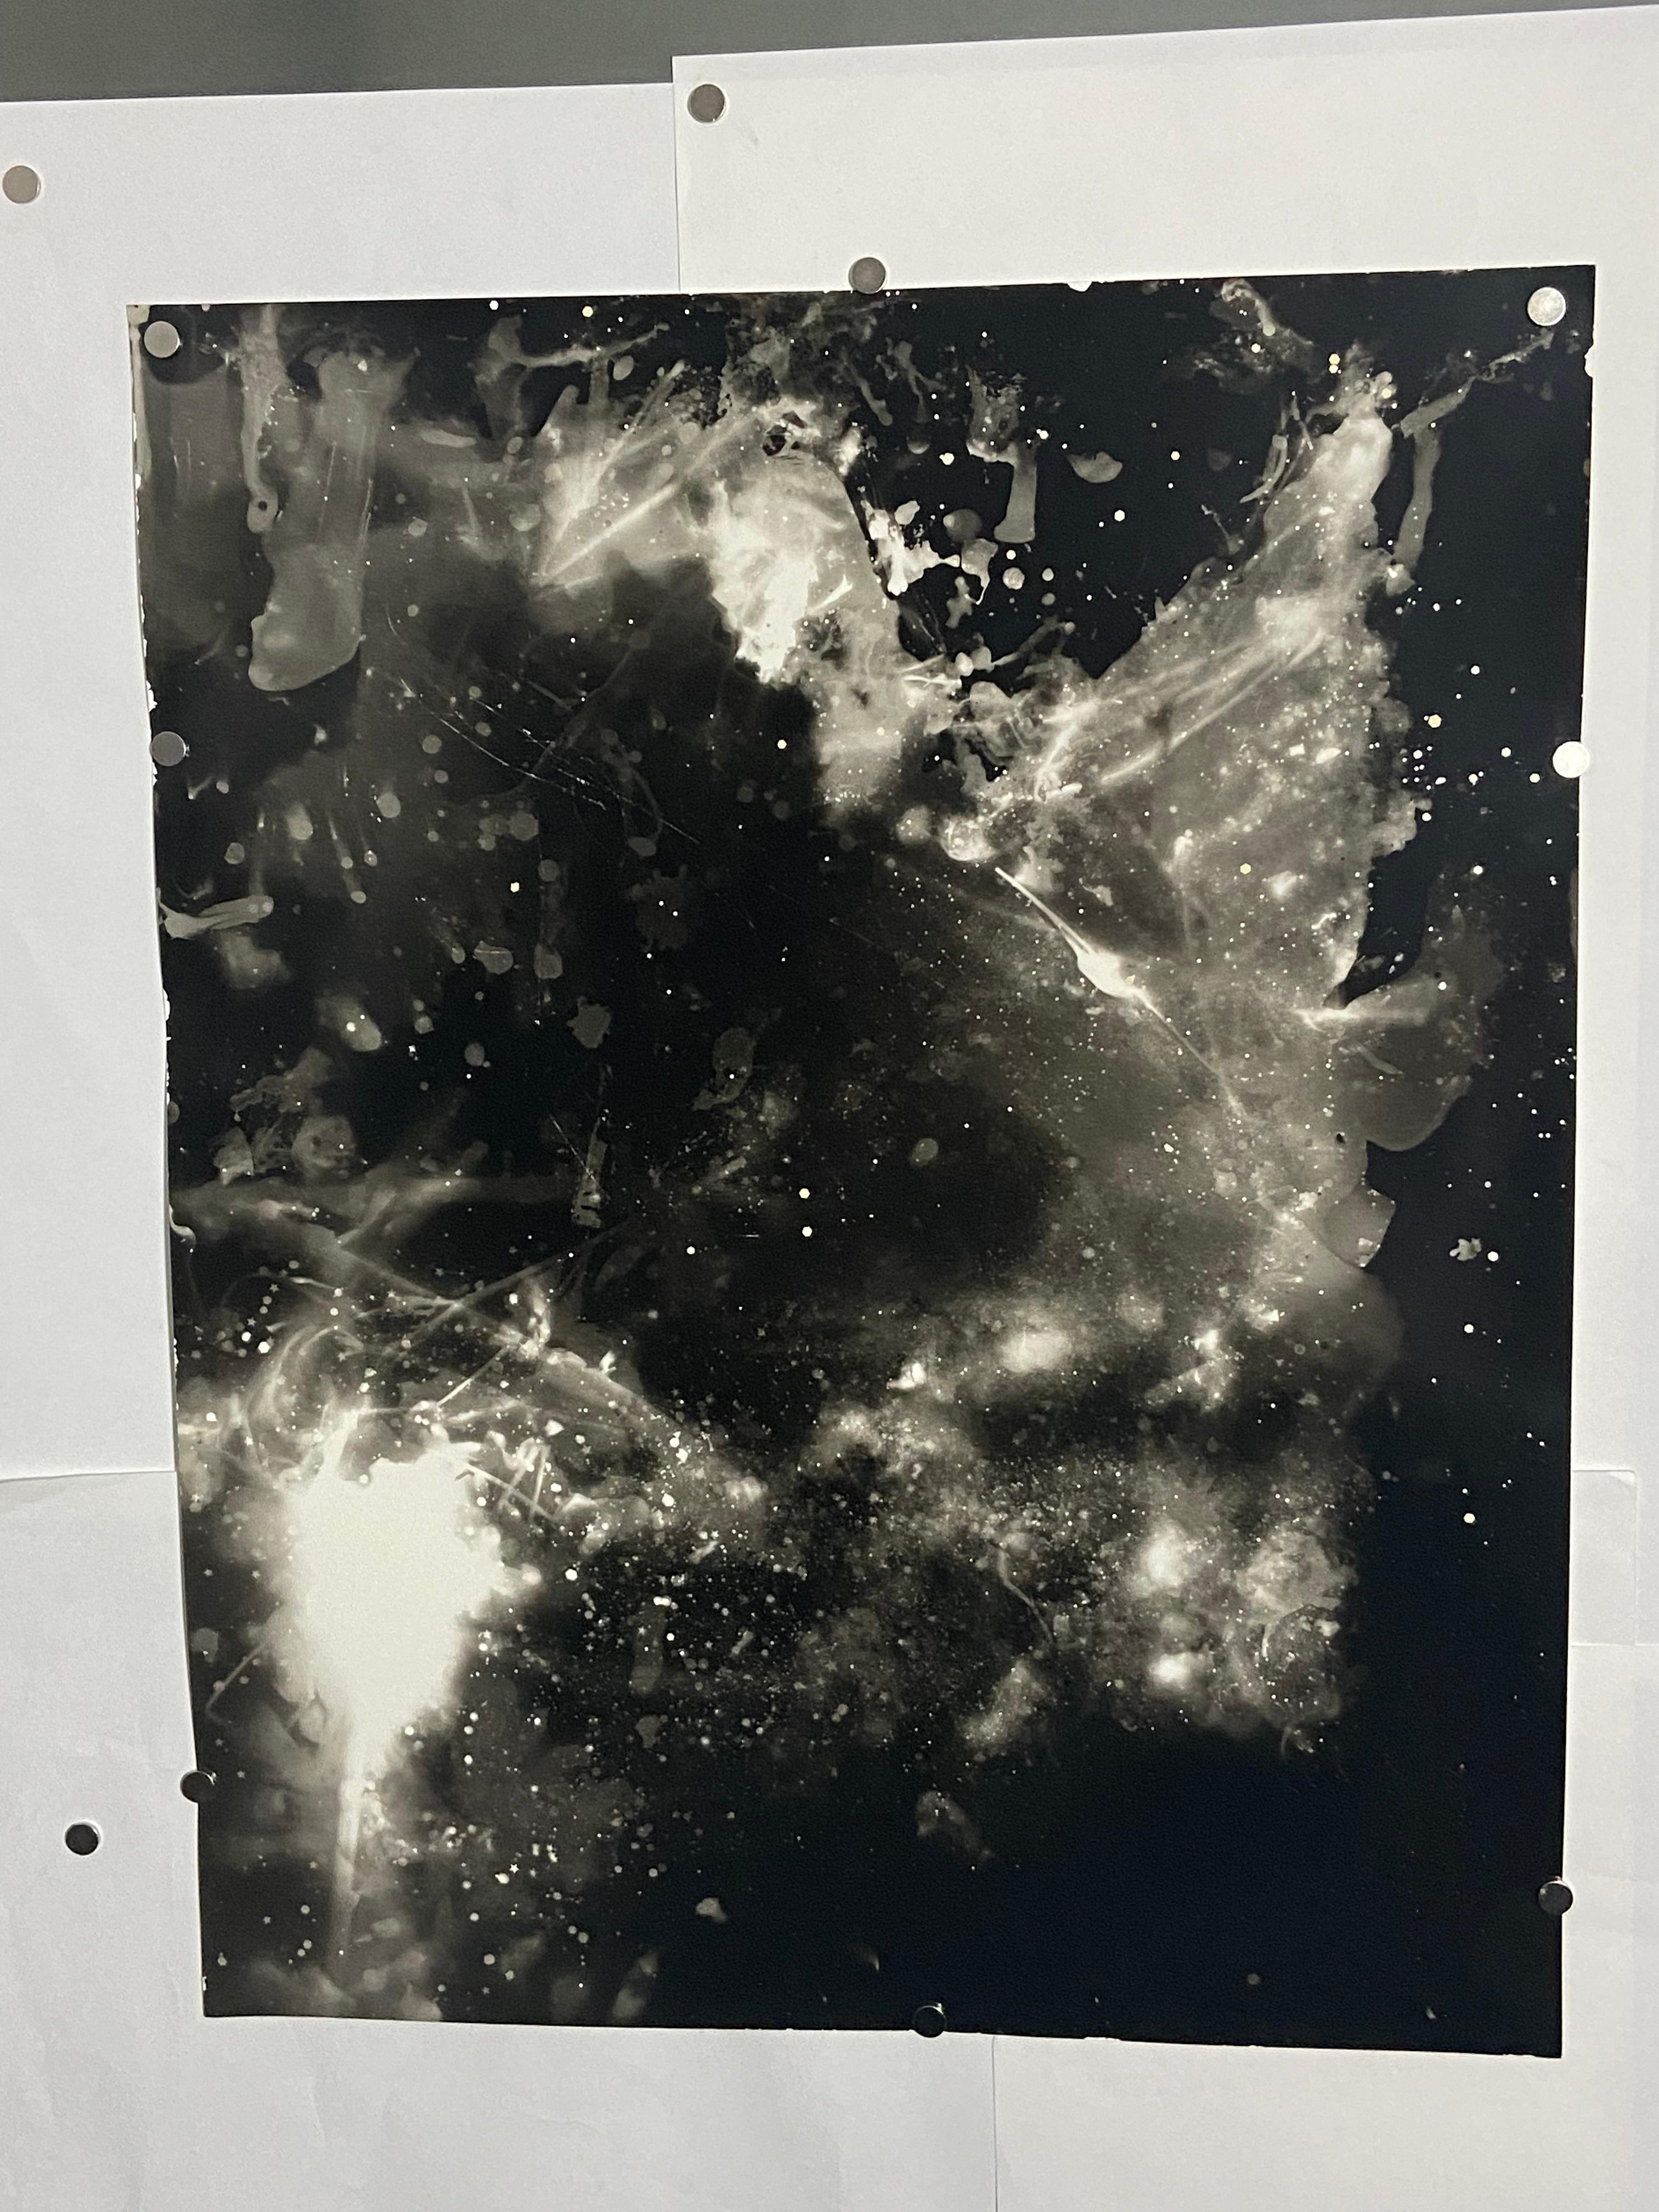 Entrance (Black Hole)- contemporary abstract black and white darkroom photograph - Photograph by Kimberly Schneider Photography